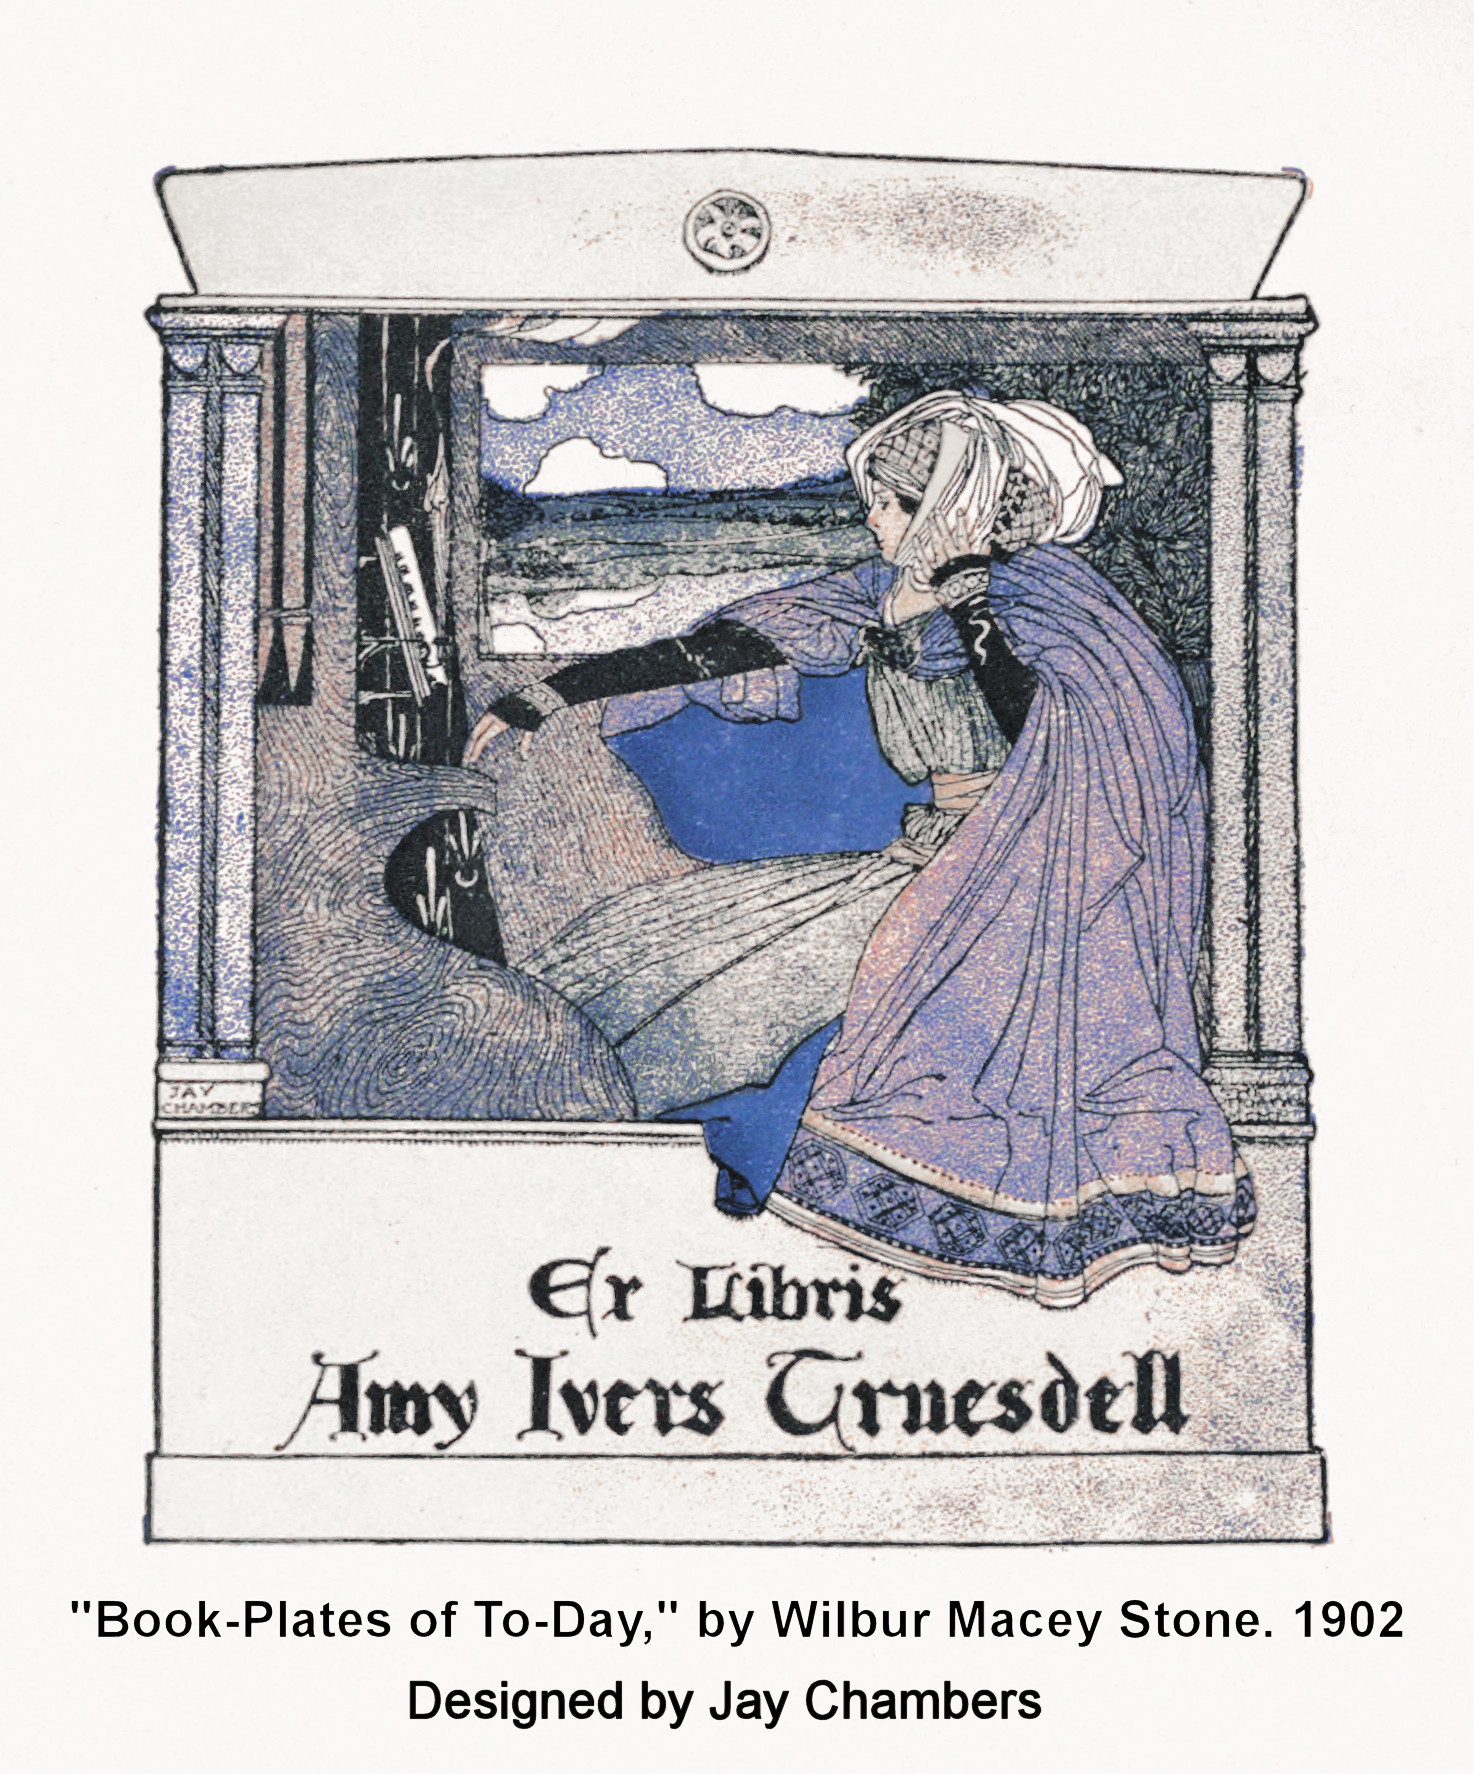 amy ivers truesdell book plate by jay chambers